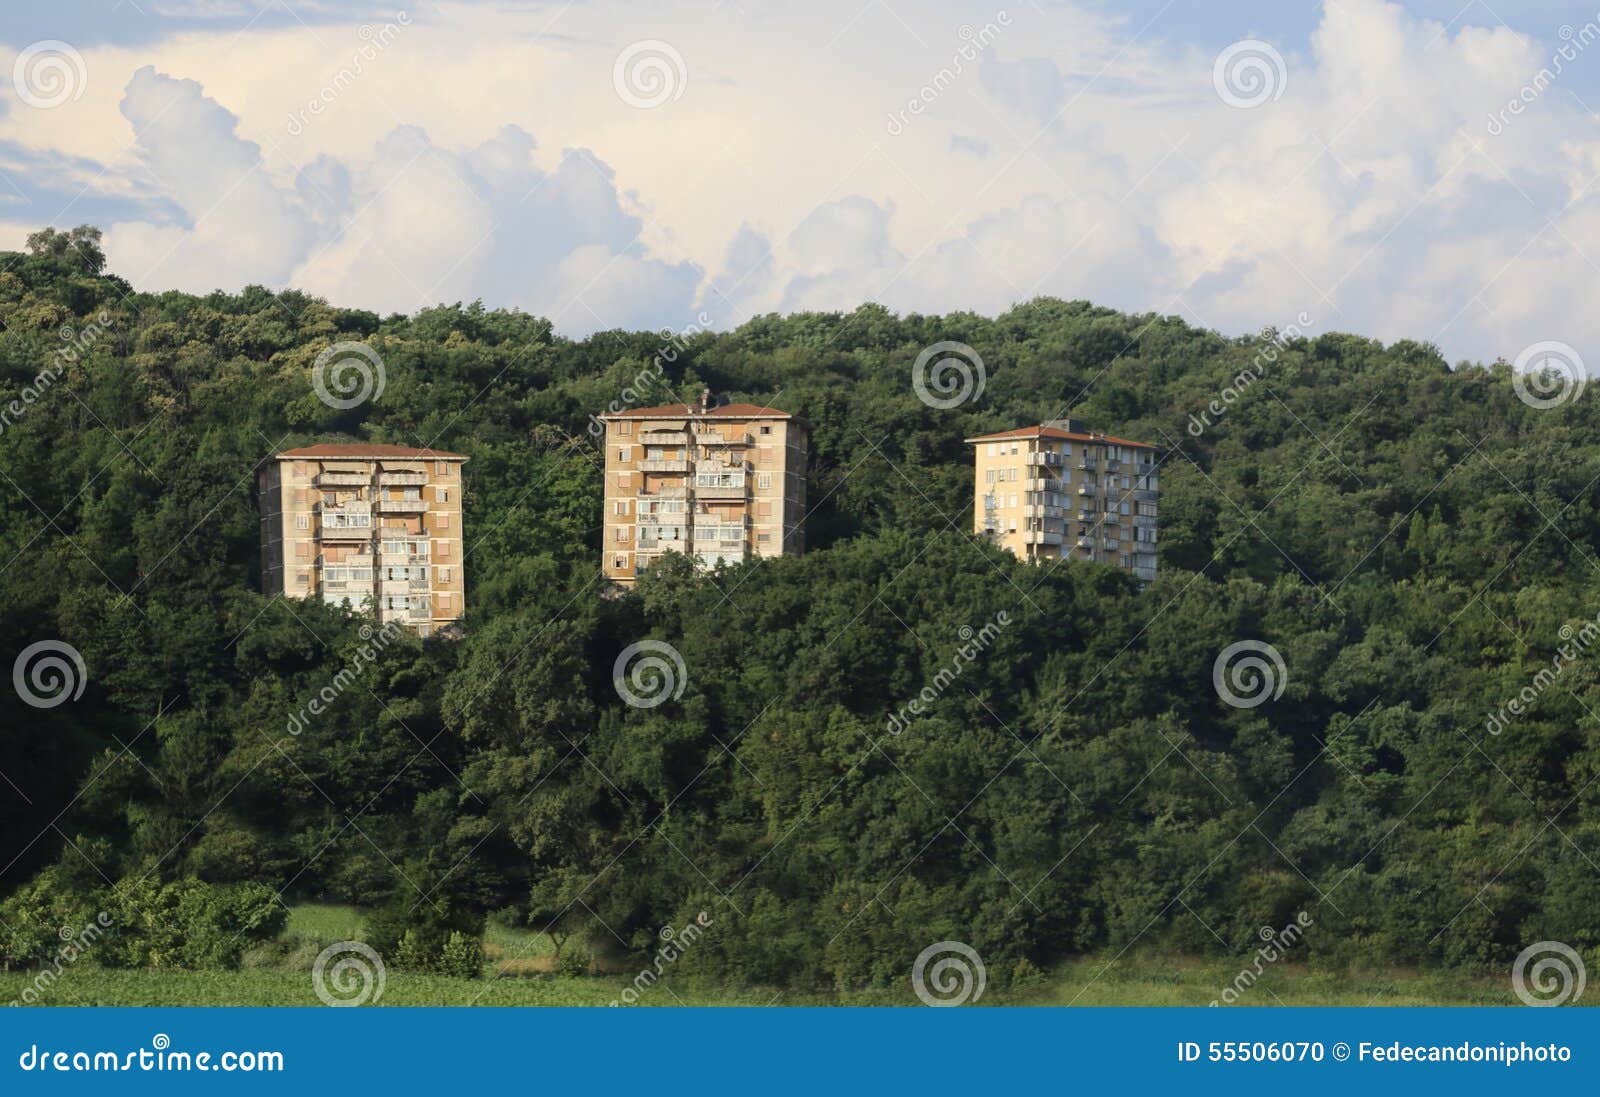 three abusive houses on a hill in the woods